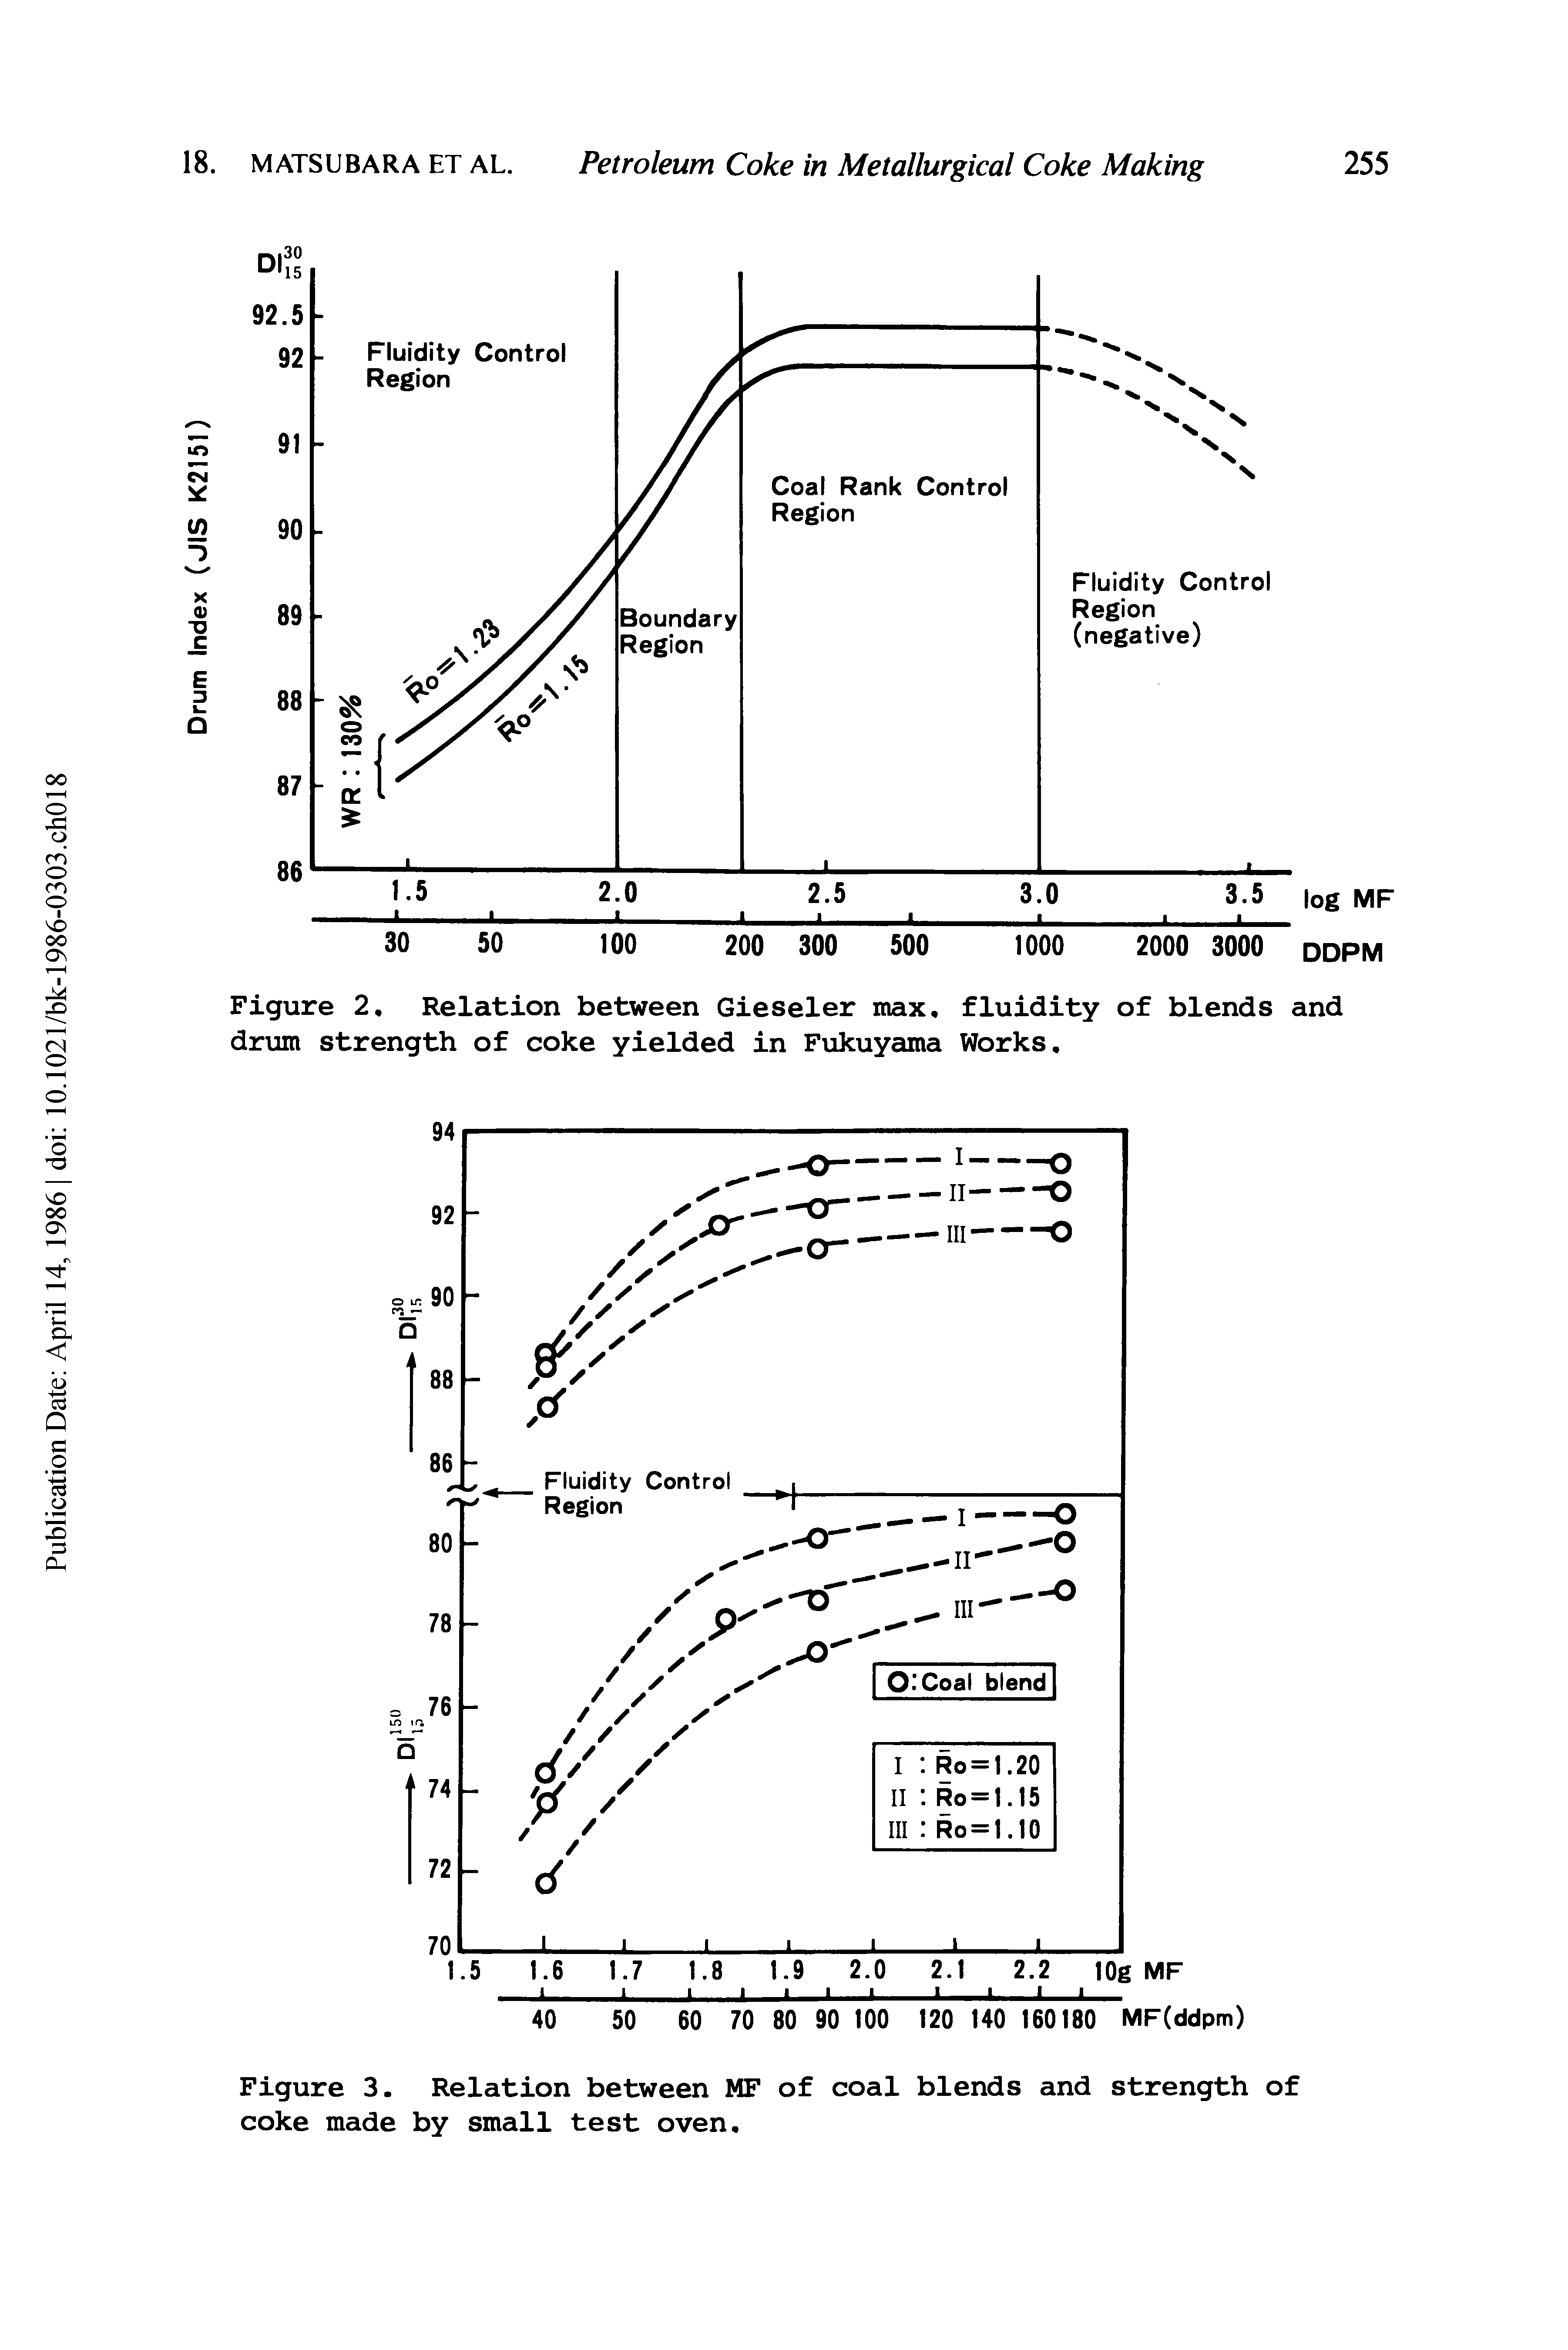 Figure 3. Relation between MF of coal blends and strength of coke made by small test oven.